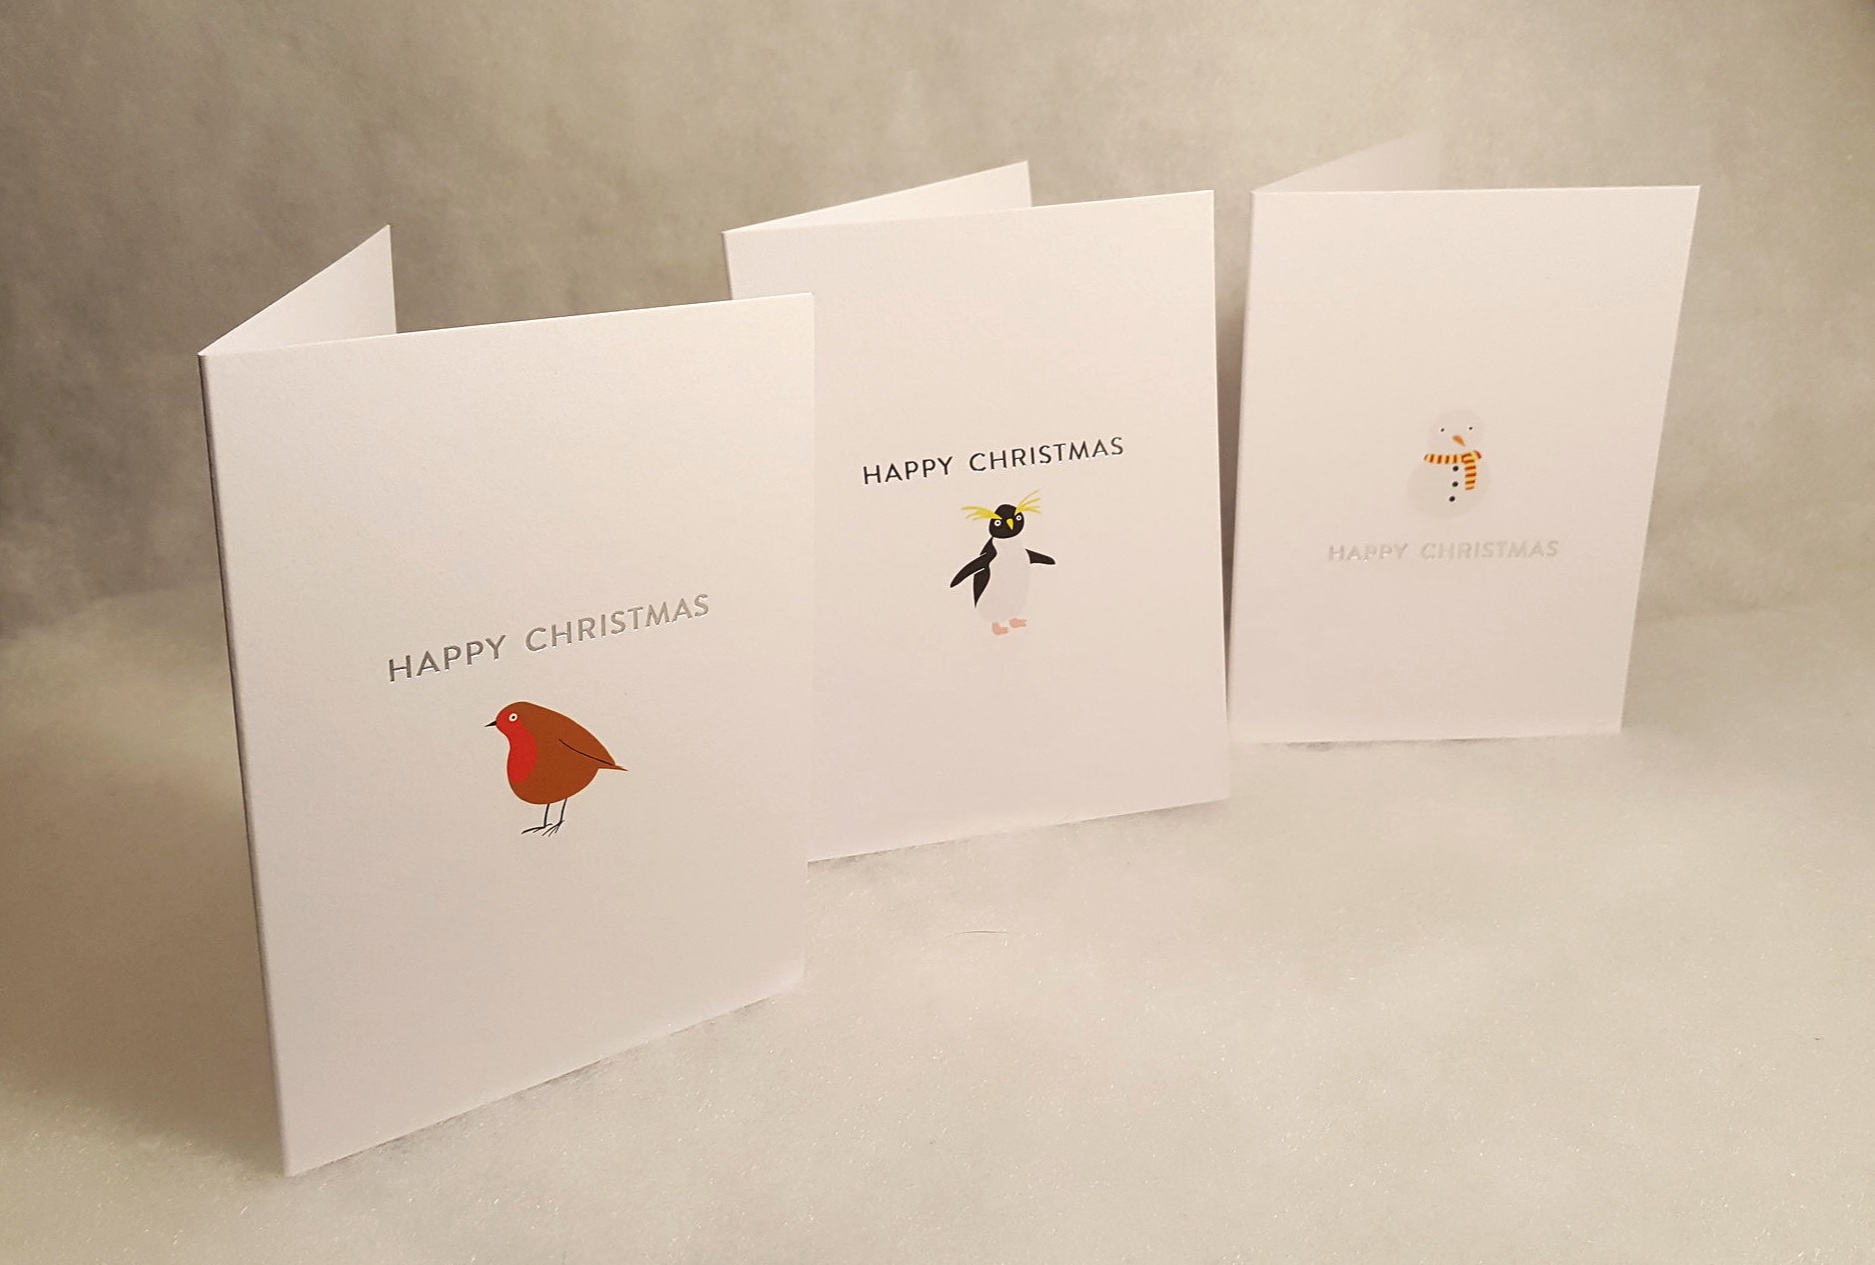 Silver foil printed Christmas cards with illustrations